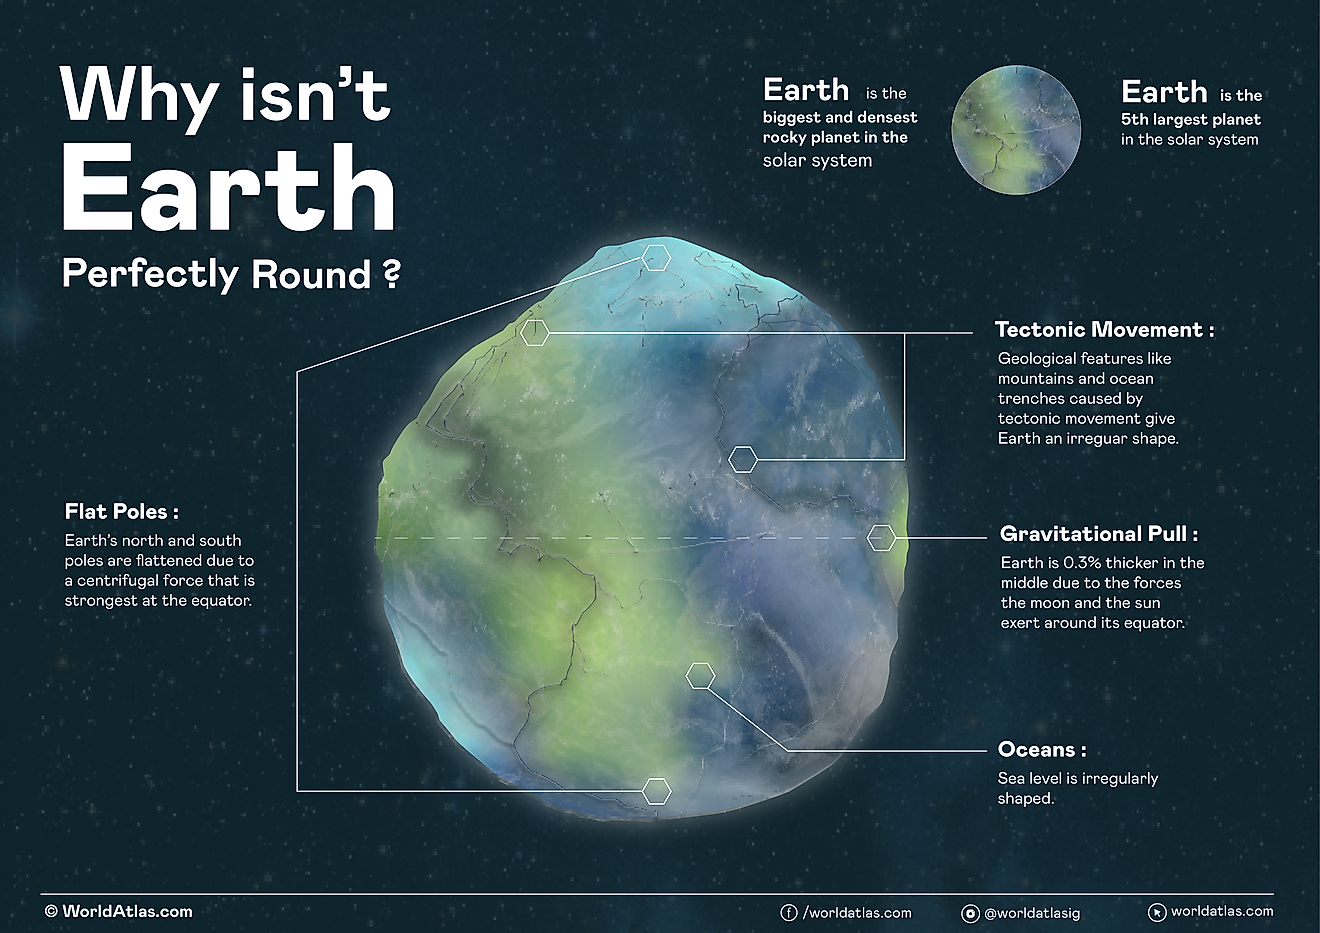 Why Isn't Earth Perfectly Round?